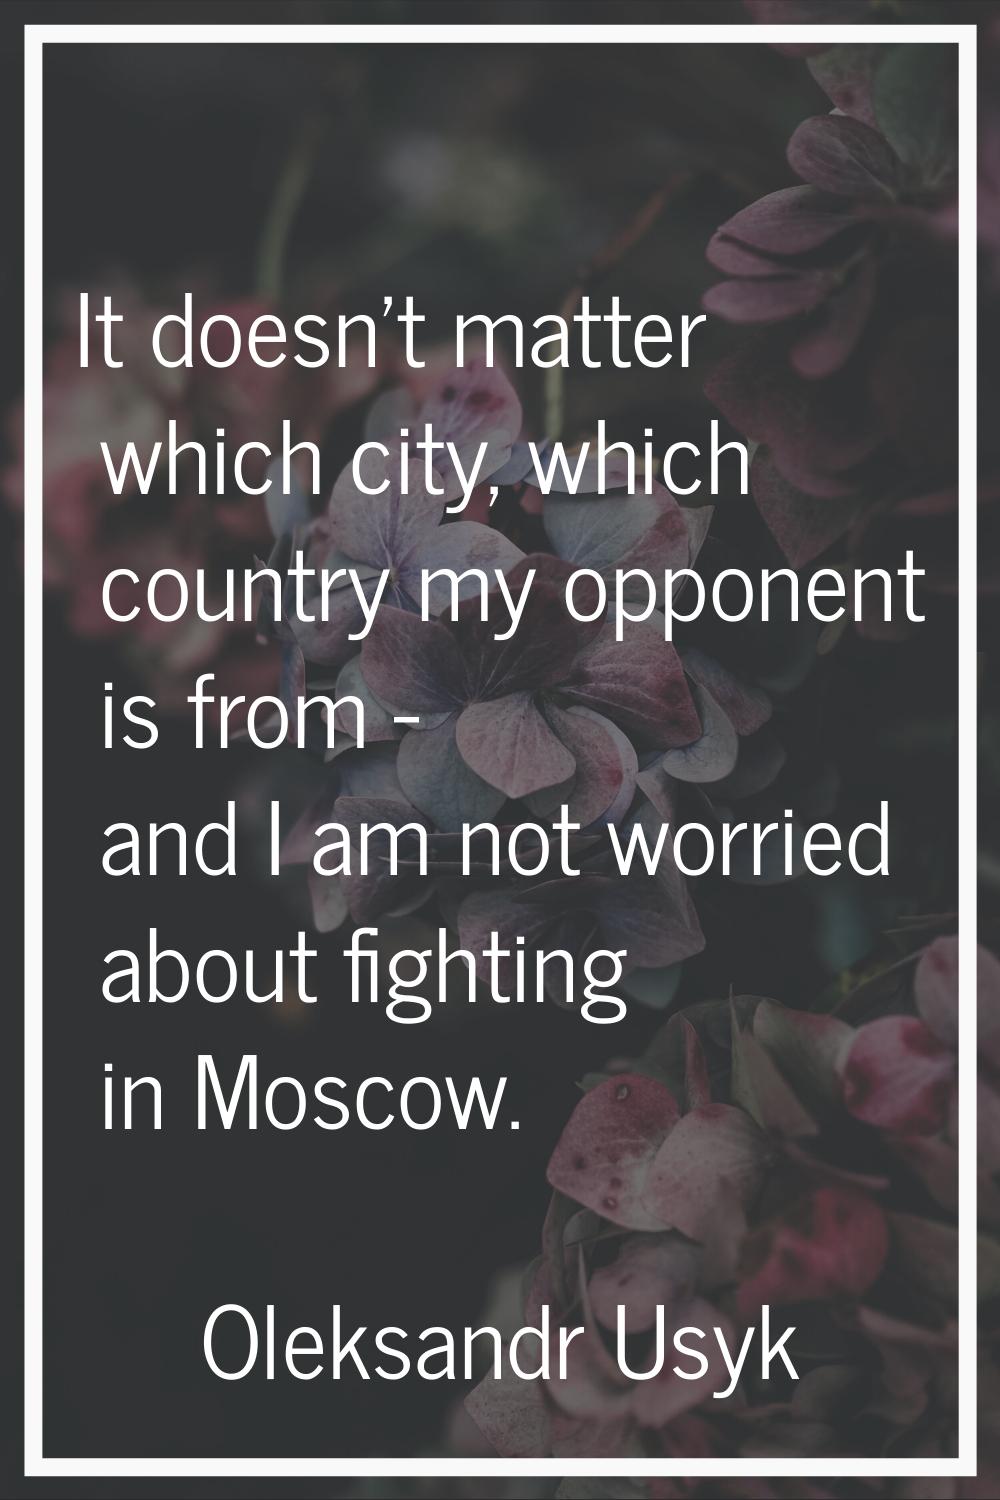 It doesn't matter which city, which country my opponent is from - and I am not worried about fighti